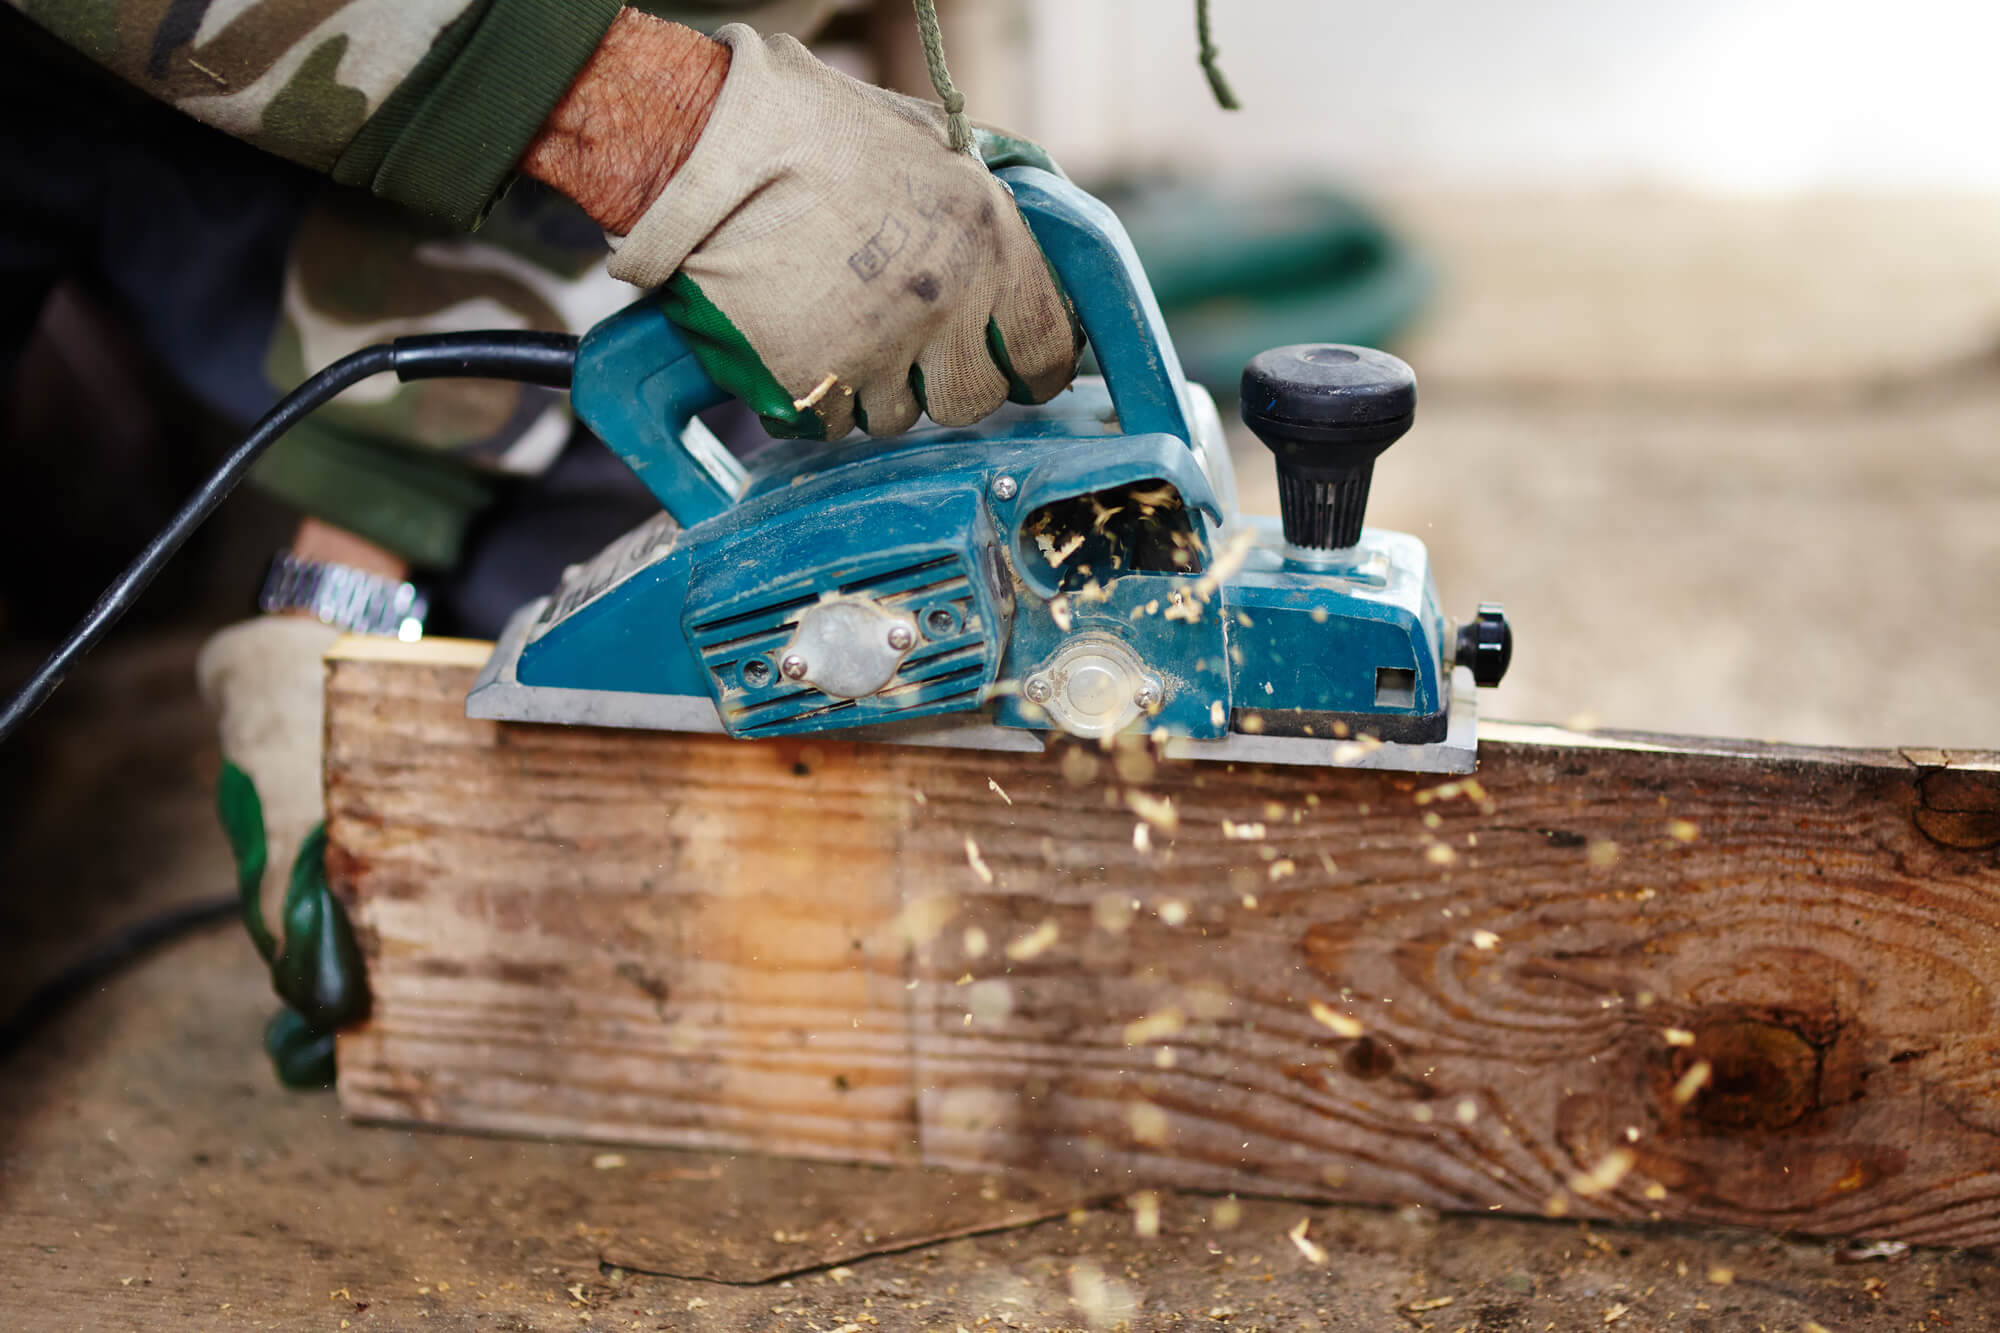 A person using a power tool on a piece of wood
